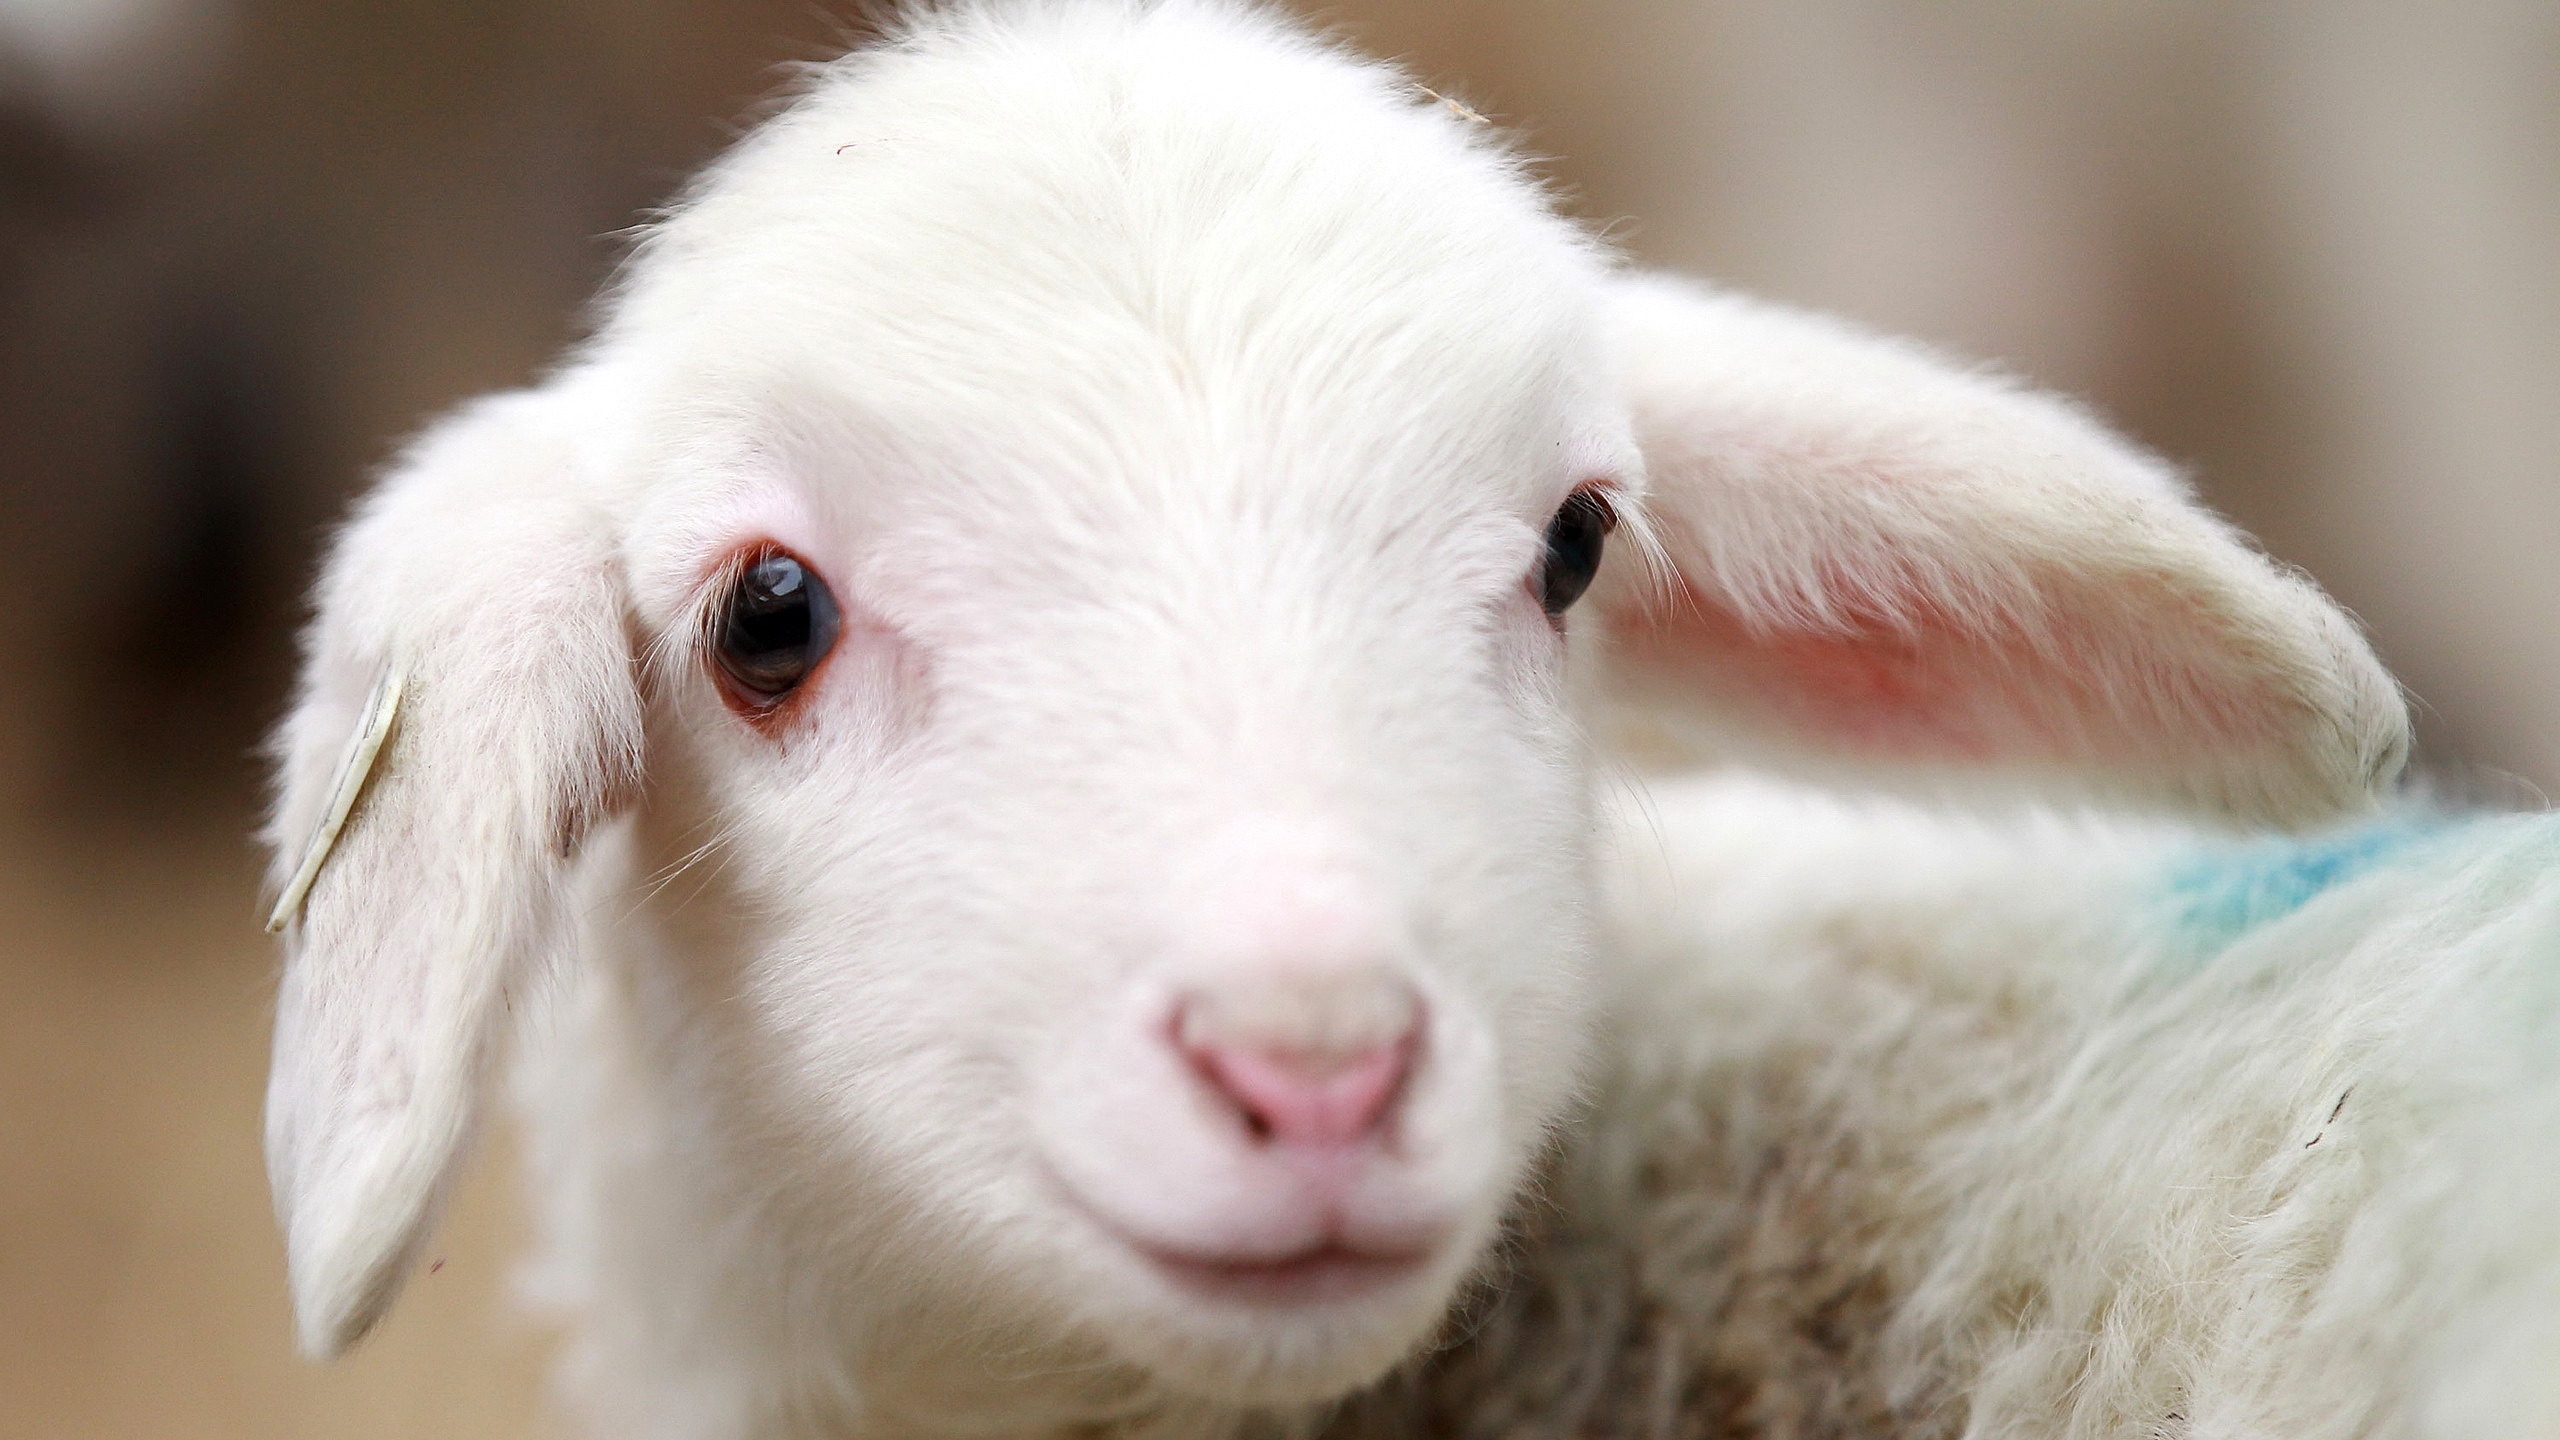 Cute Lamb for 2560x1440 HDTV resolution